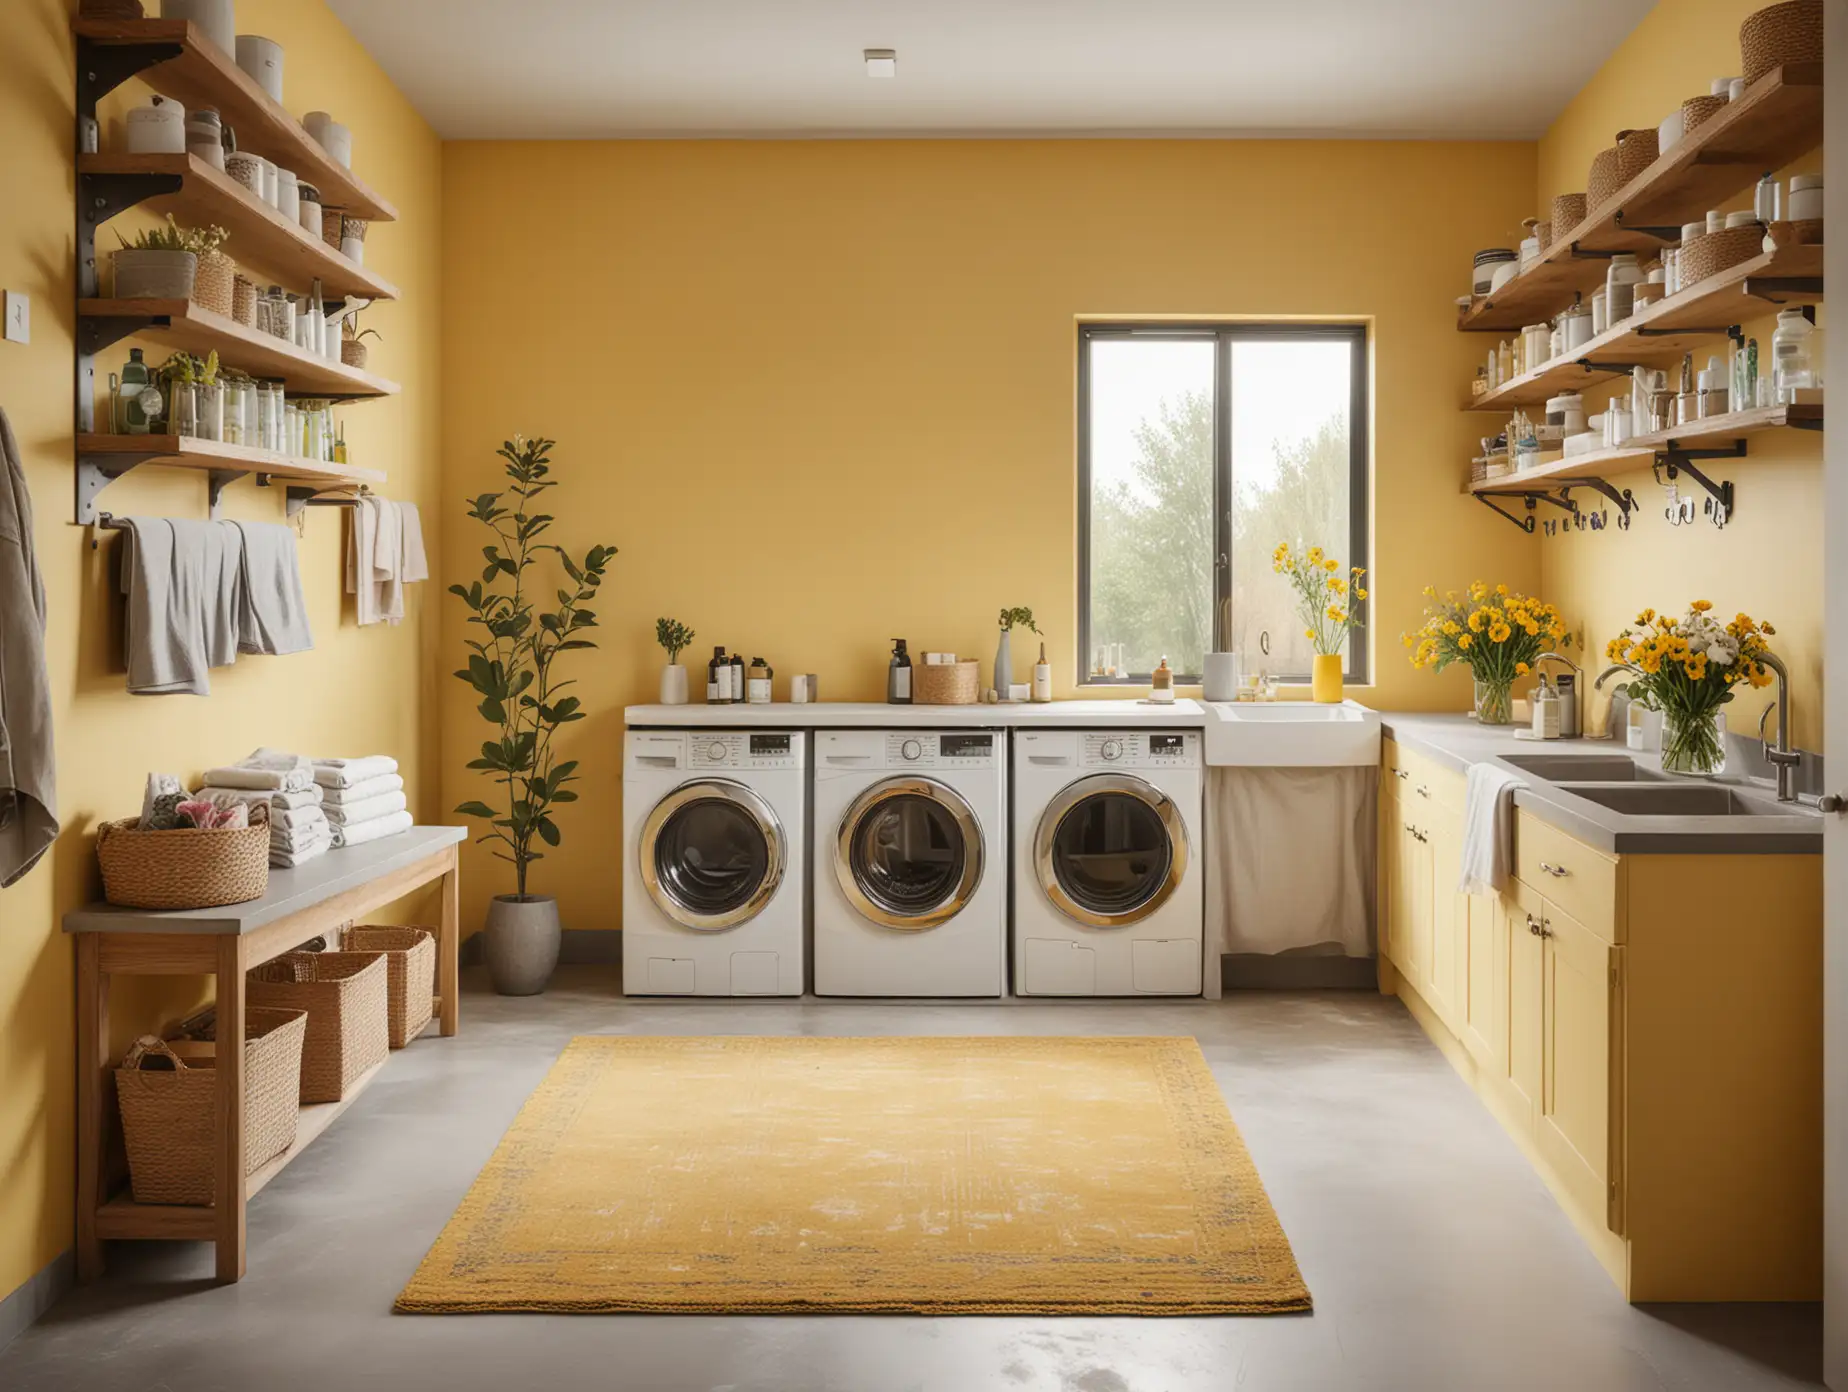 Generate a wide shot of a modern laundry room with a cozy rug underfoot, featuring shelves lined with neatly arranged detergents and softeners, a standing vase filled with fresh flowers, and sleek concrete sink basins against a backdrop YELLO WALL
